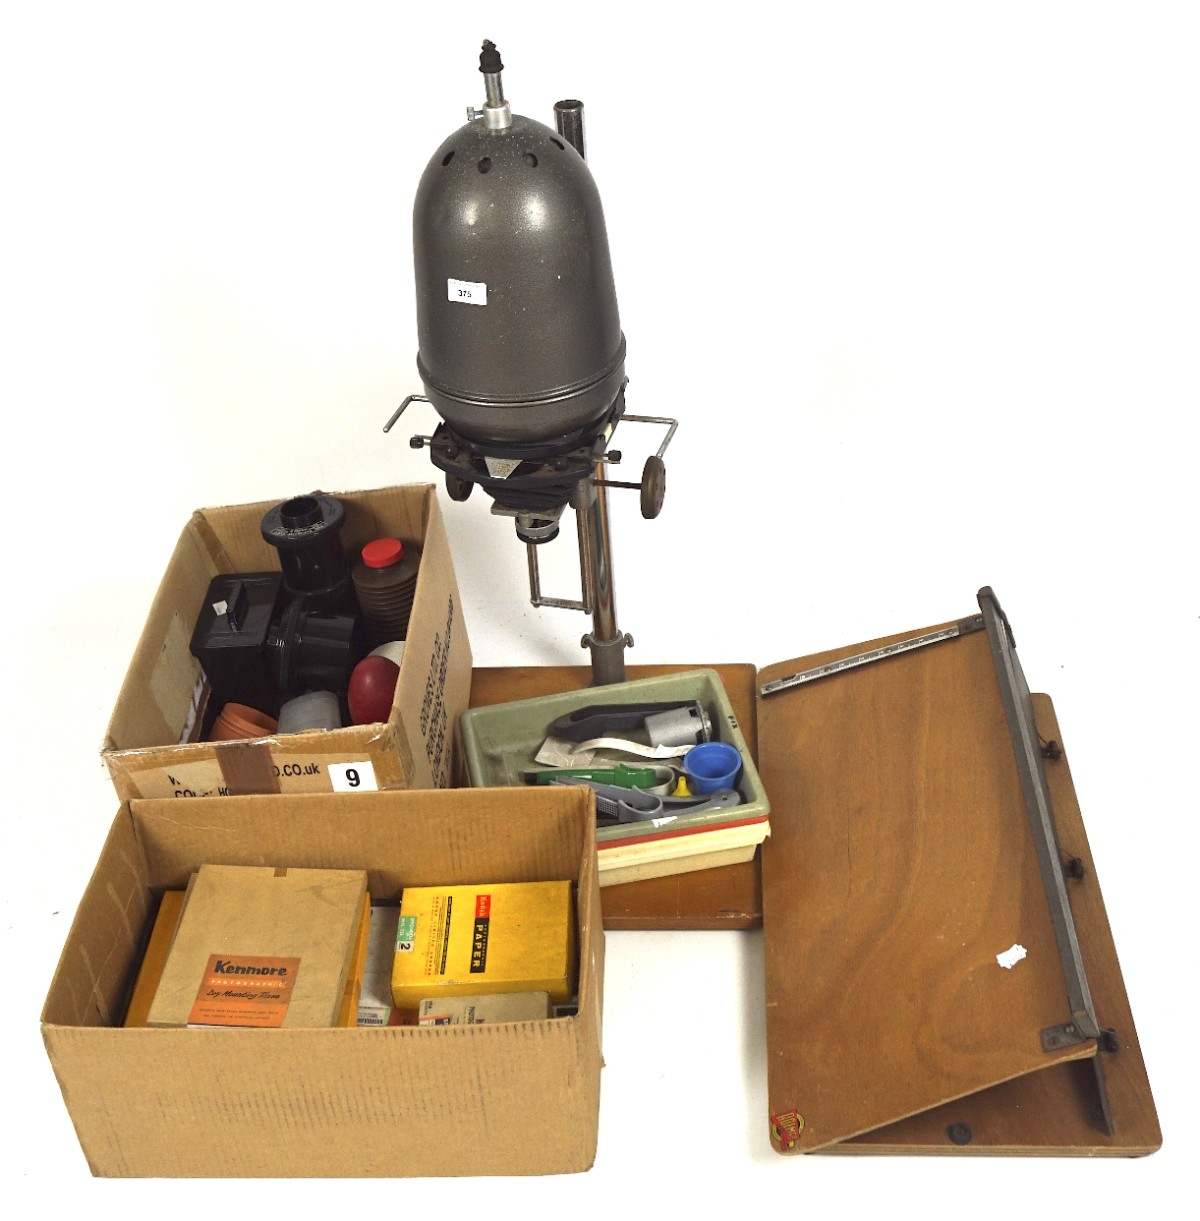 A vintage photographic darkroom enlarger and an assortment of related equipment with guillotine